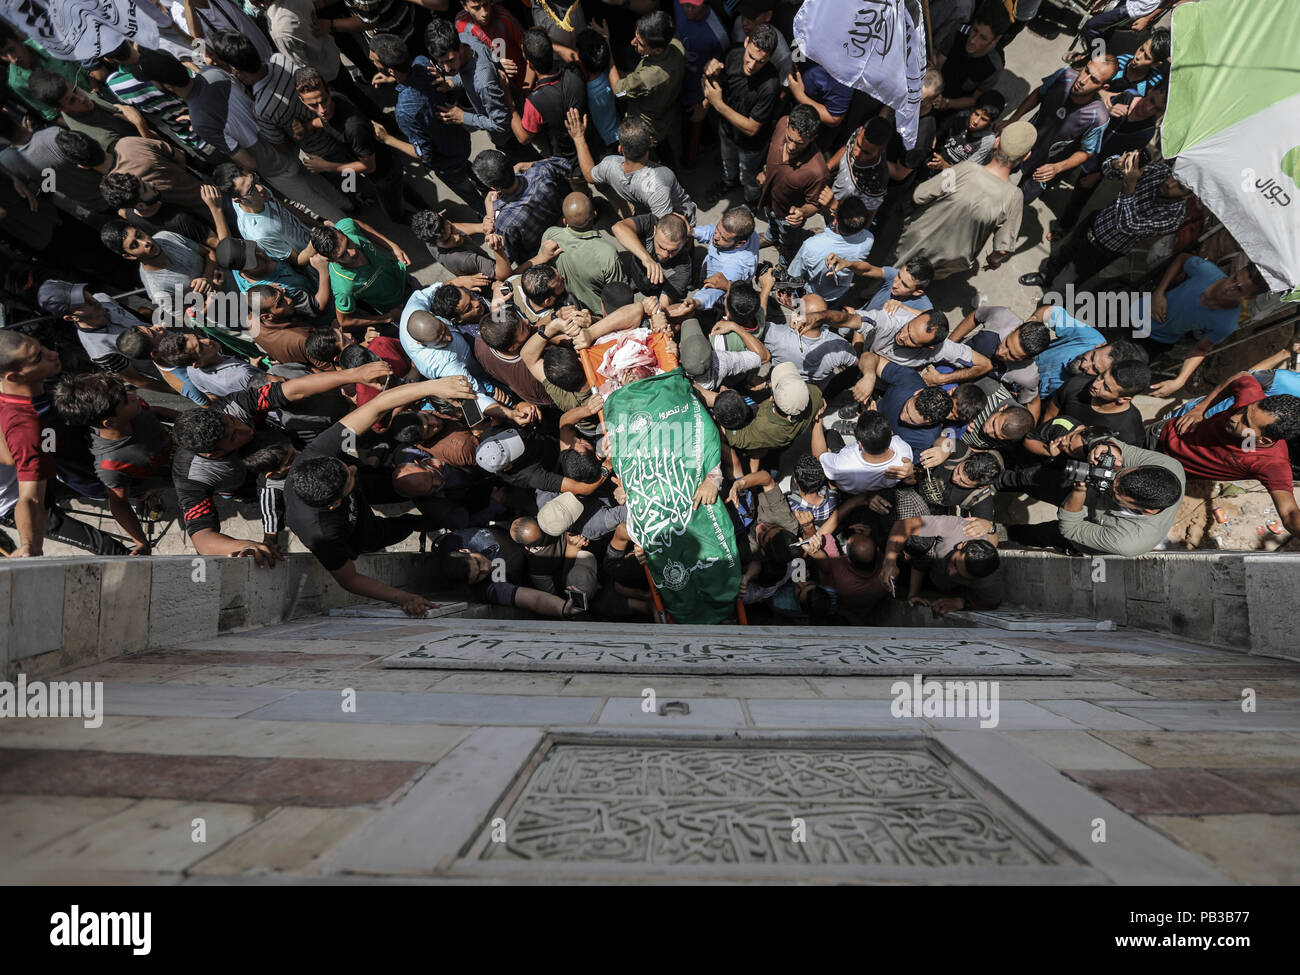 26 July 2018, Palestinian Autonomous Territories, Gaza: Palestinian mourners carry the body of a Kassam brigade fighter killed the day before in Israeli attacks in the coastal strip during his funeral. A few days after a ceasefire was announced, the situation in Gaza has escalated again. Photo: Wissam Nassar/dpa Stock Photo